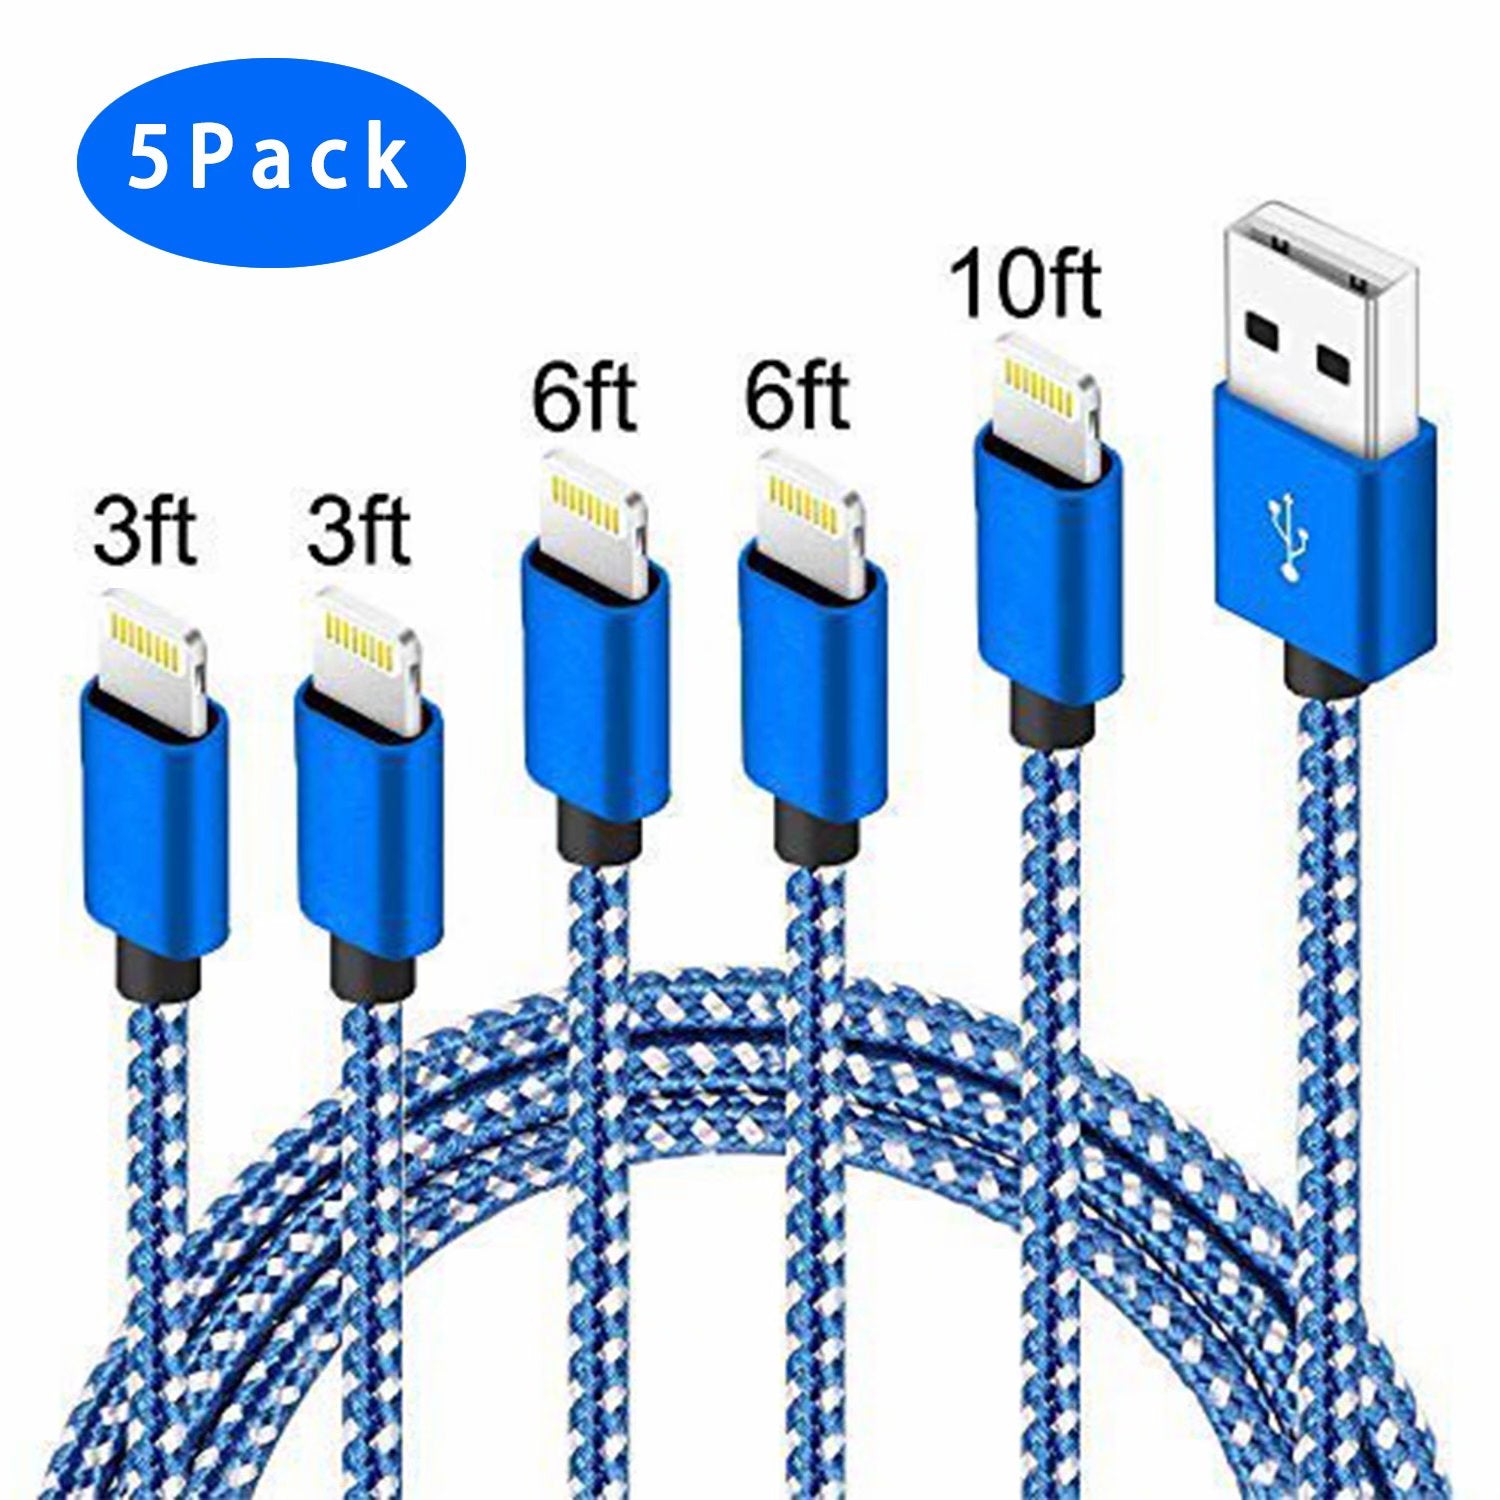 SUGIFT Lightning Cable 5Pack(3/3/6/6/10FT)Fast Cable Nylon Braided Compatible iPhone12/11/Pro/X/Xs Max/XR and More